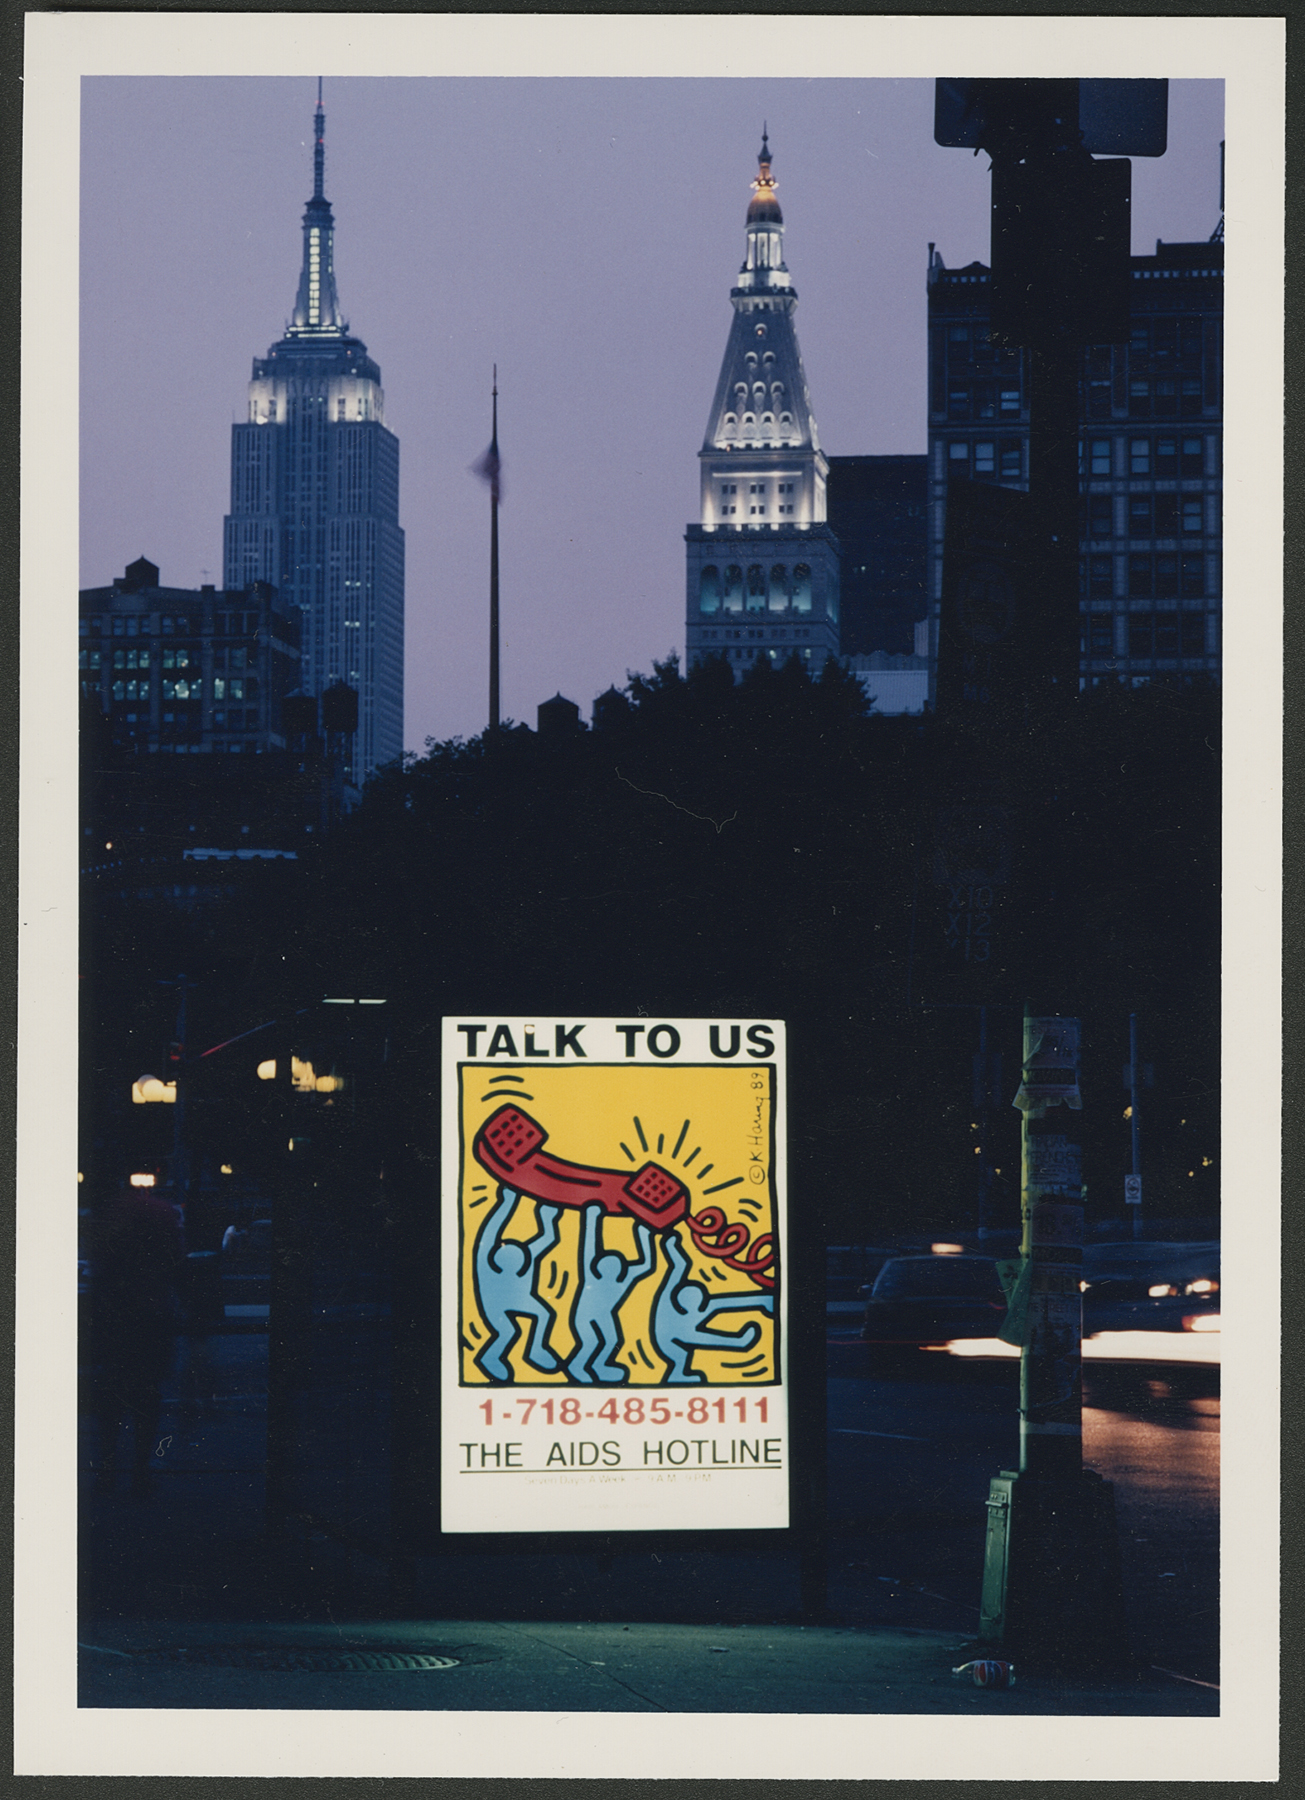 AIDS Hotline poster, NYC, 1989